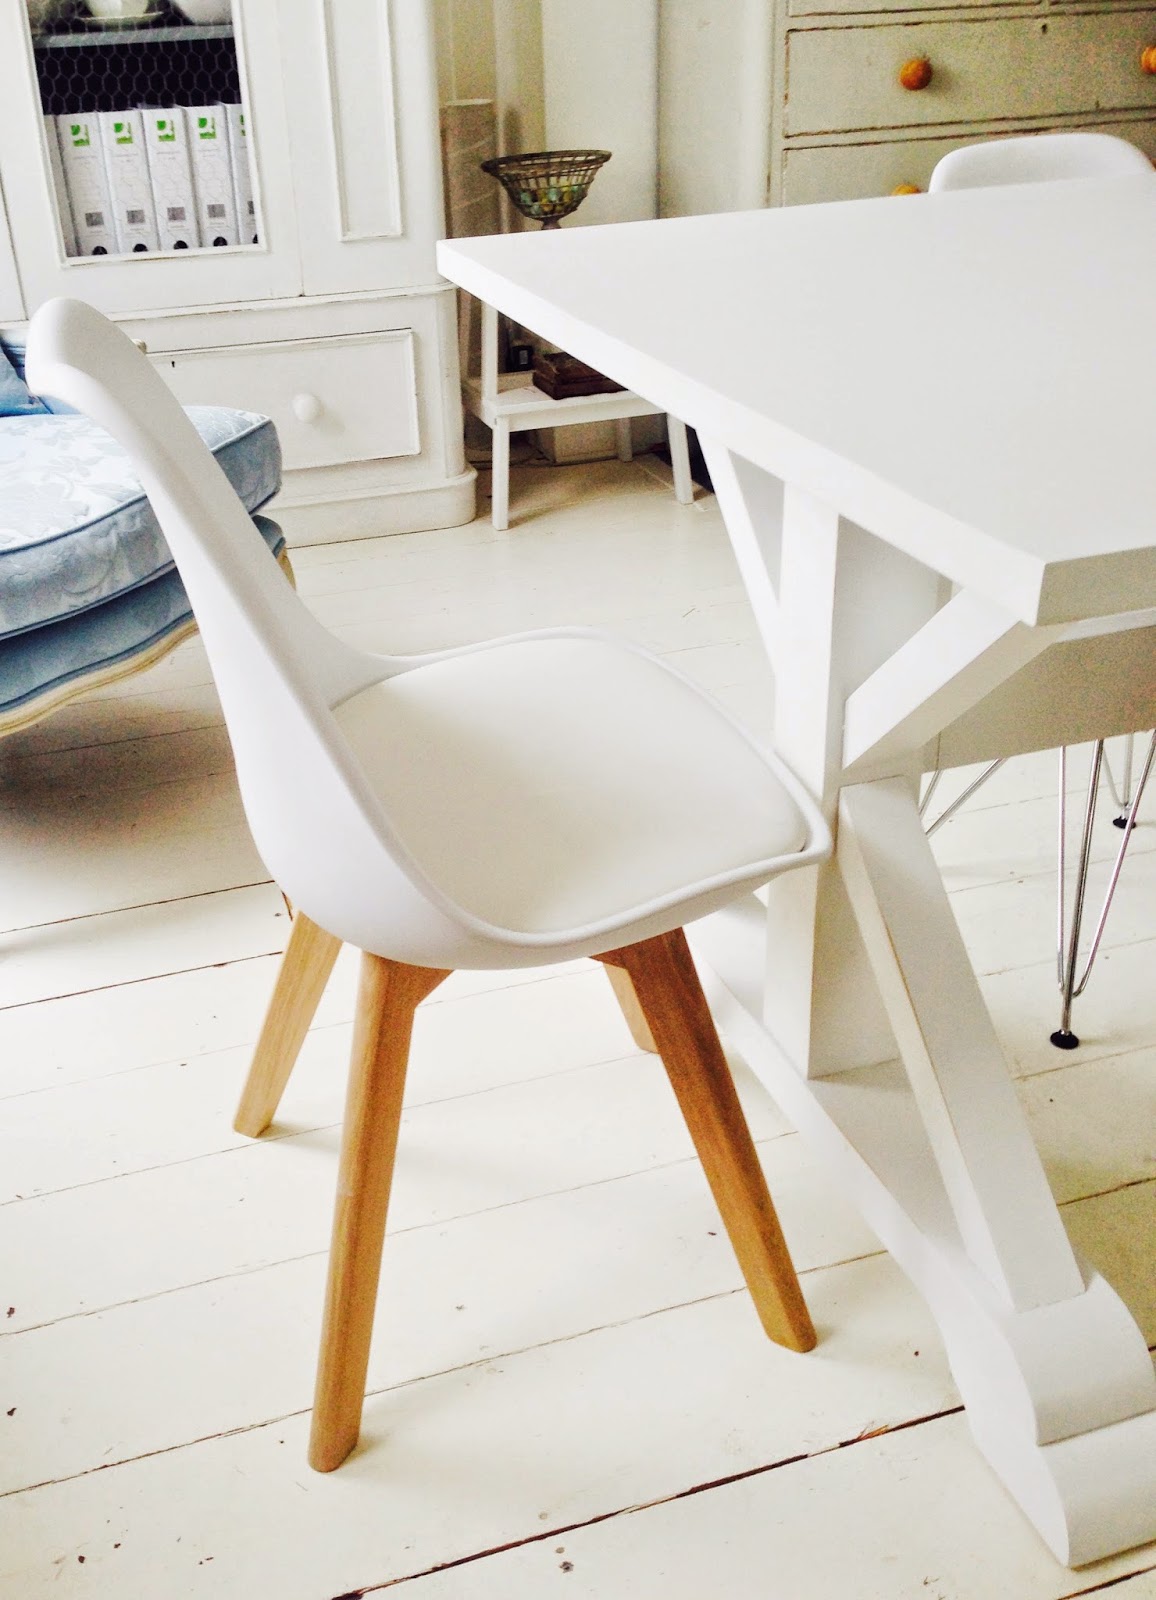 Habitat Jerry Chair And Birchbox Review The White Approach